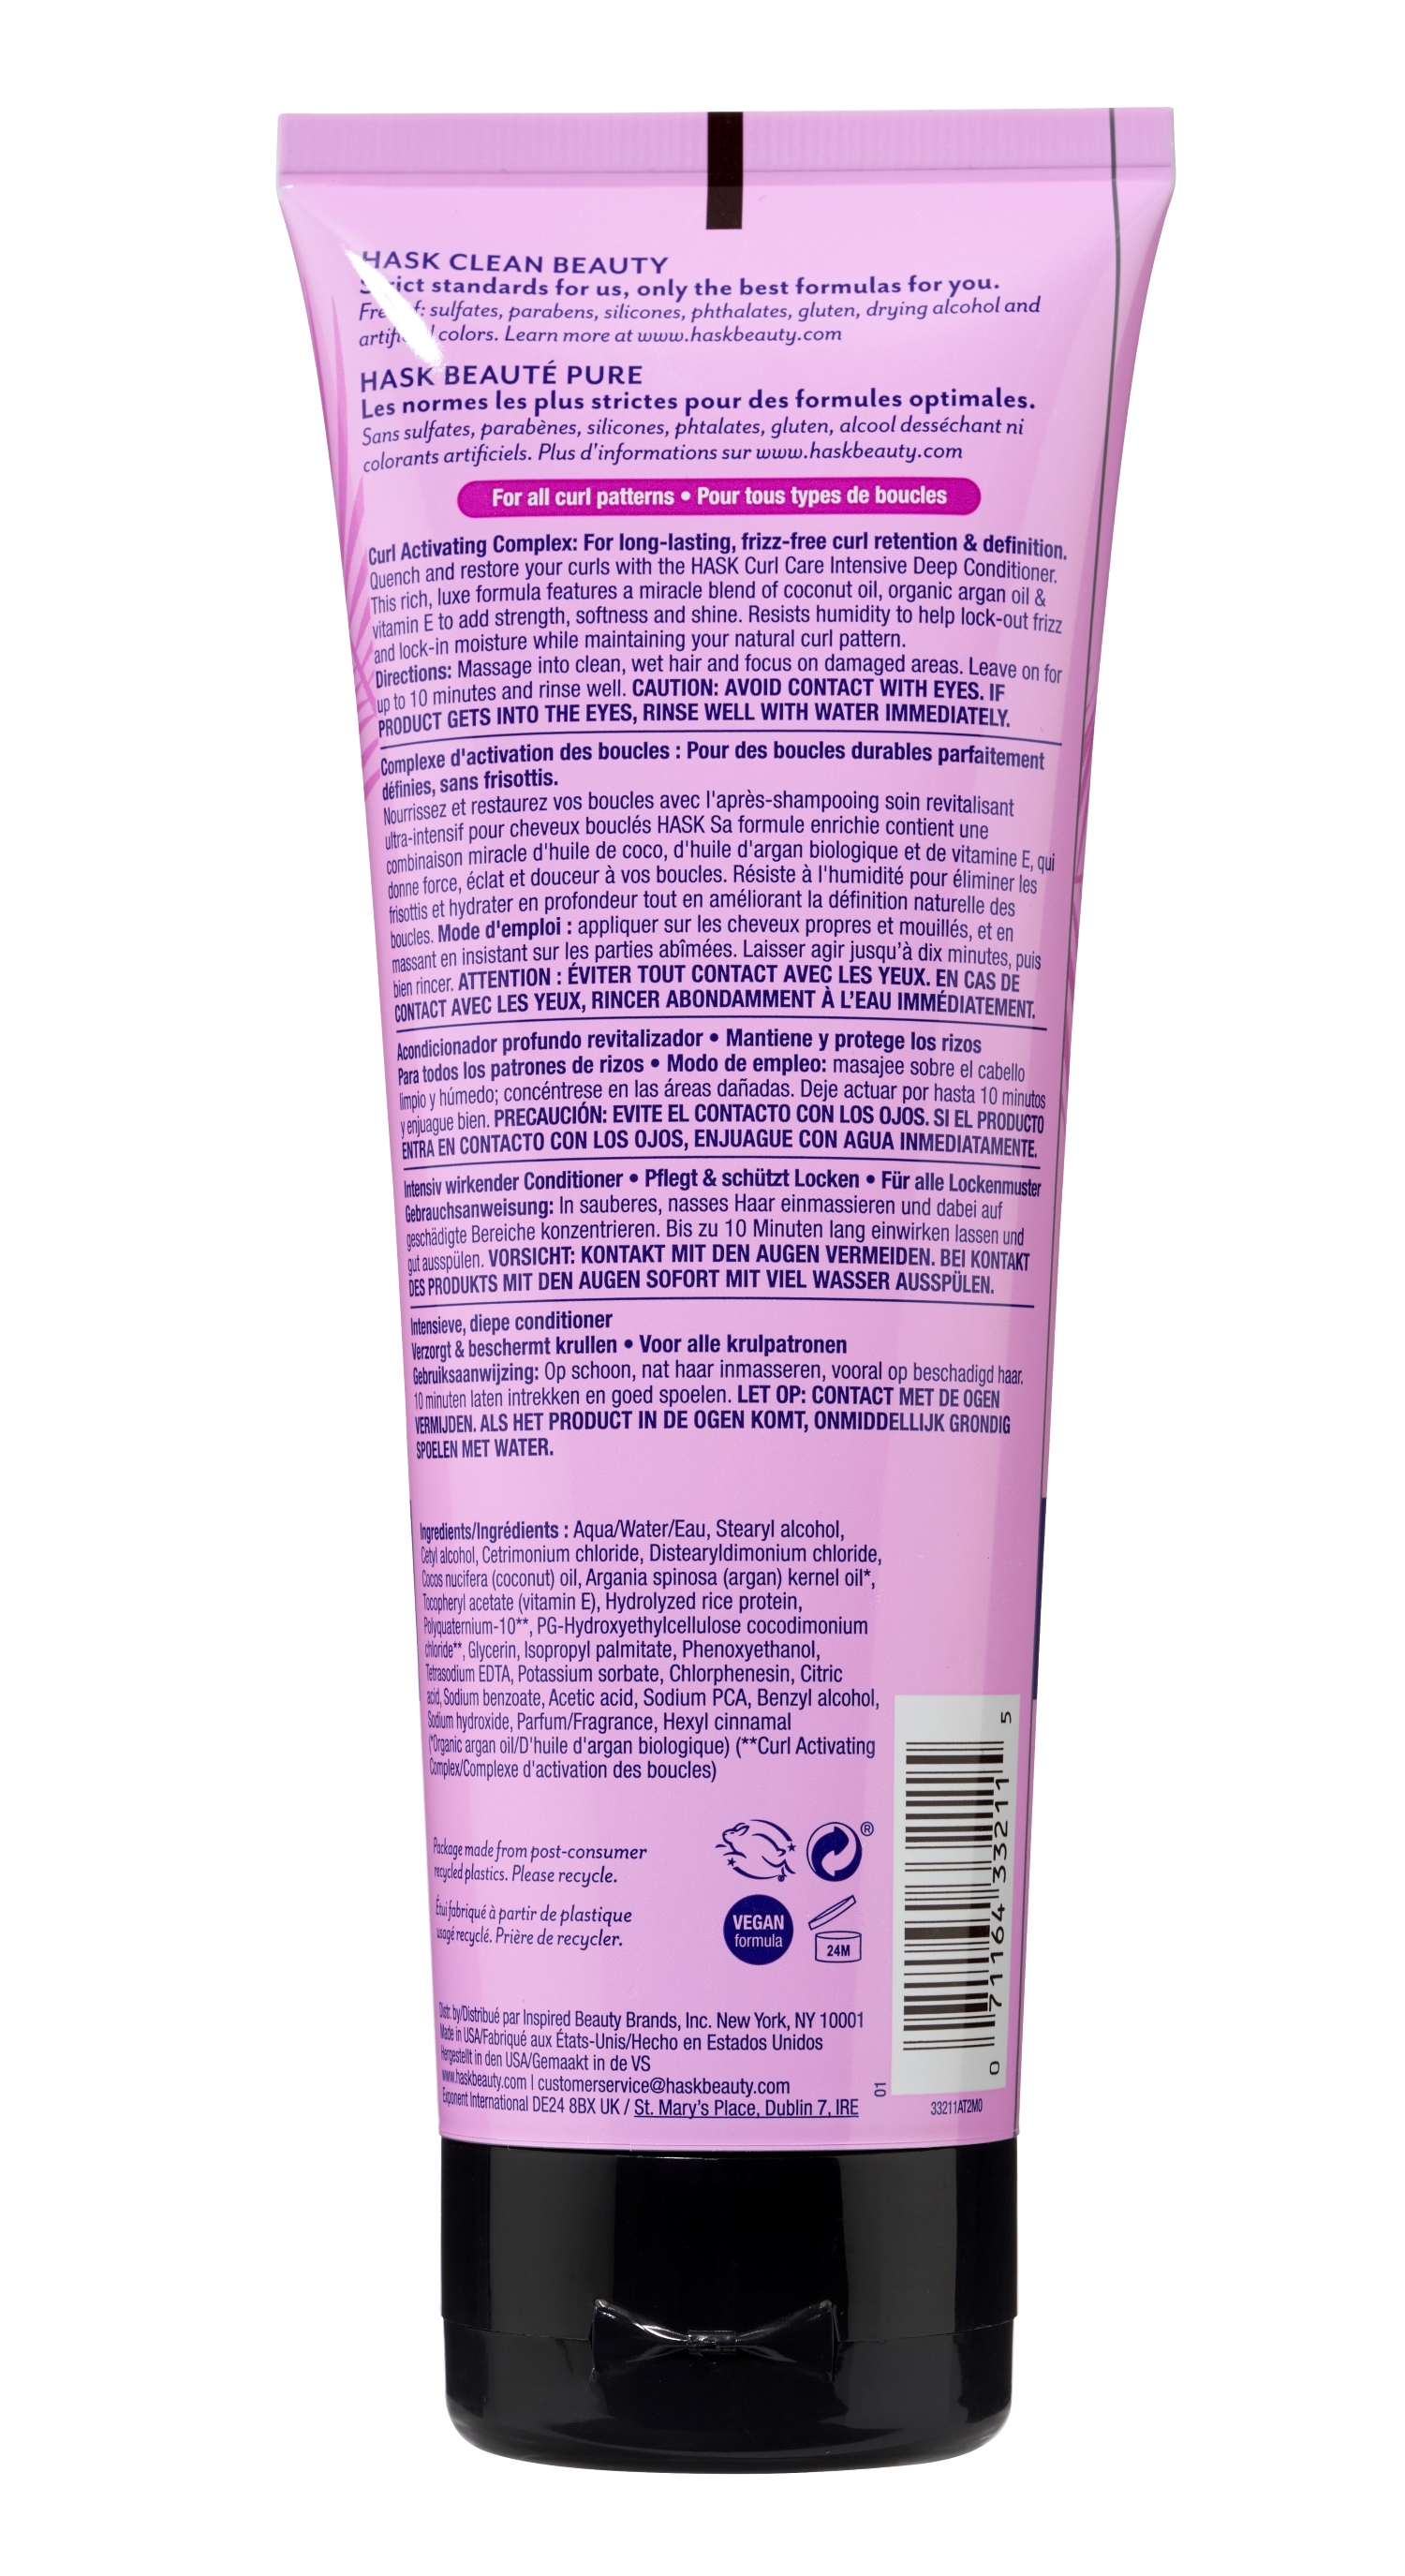 Hask Curl Care Moisturizing Shine Enhancing Deep Conditioner with Coconut oil & Vitamin E, 6.7 fl oz - image 2 of 10